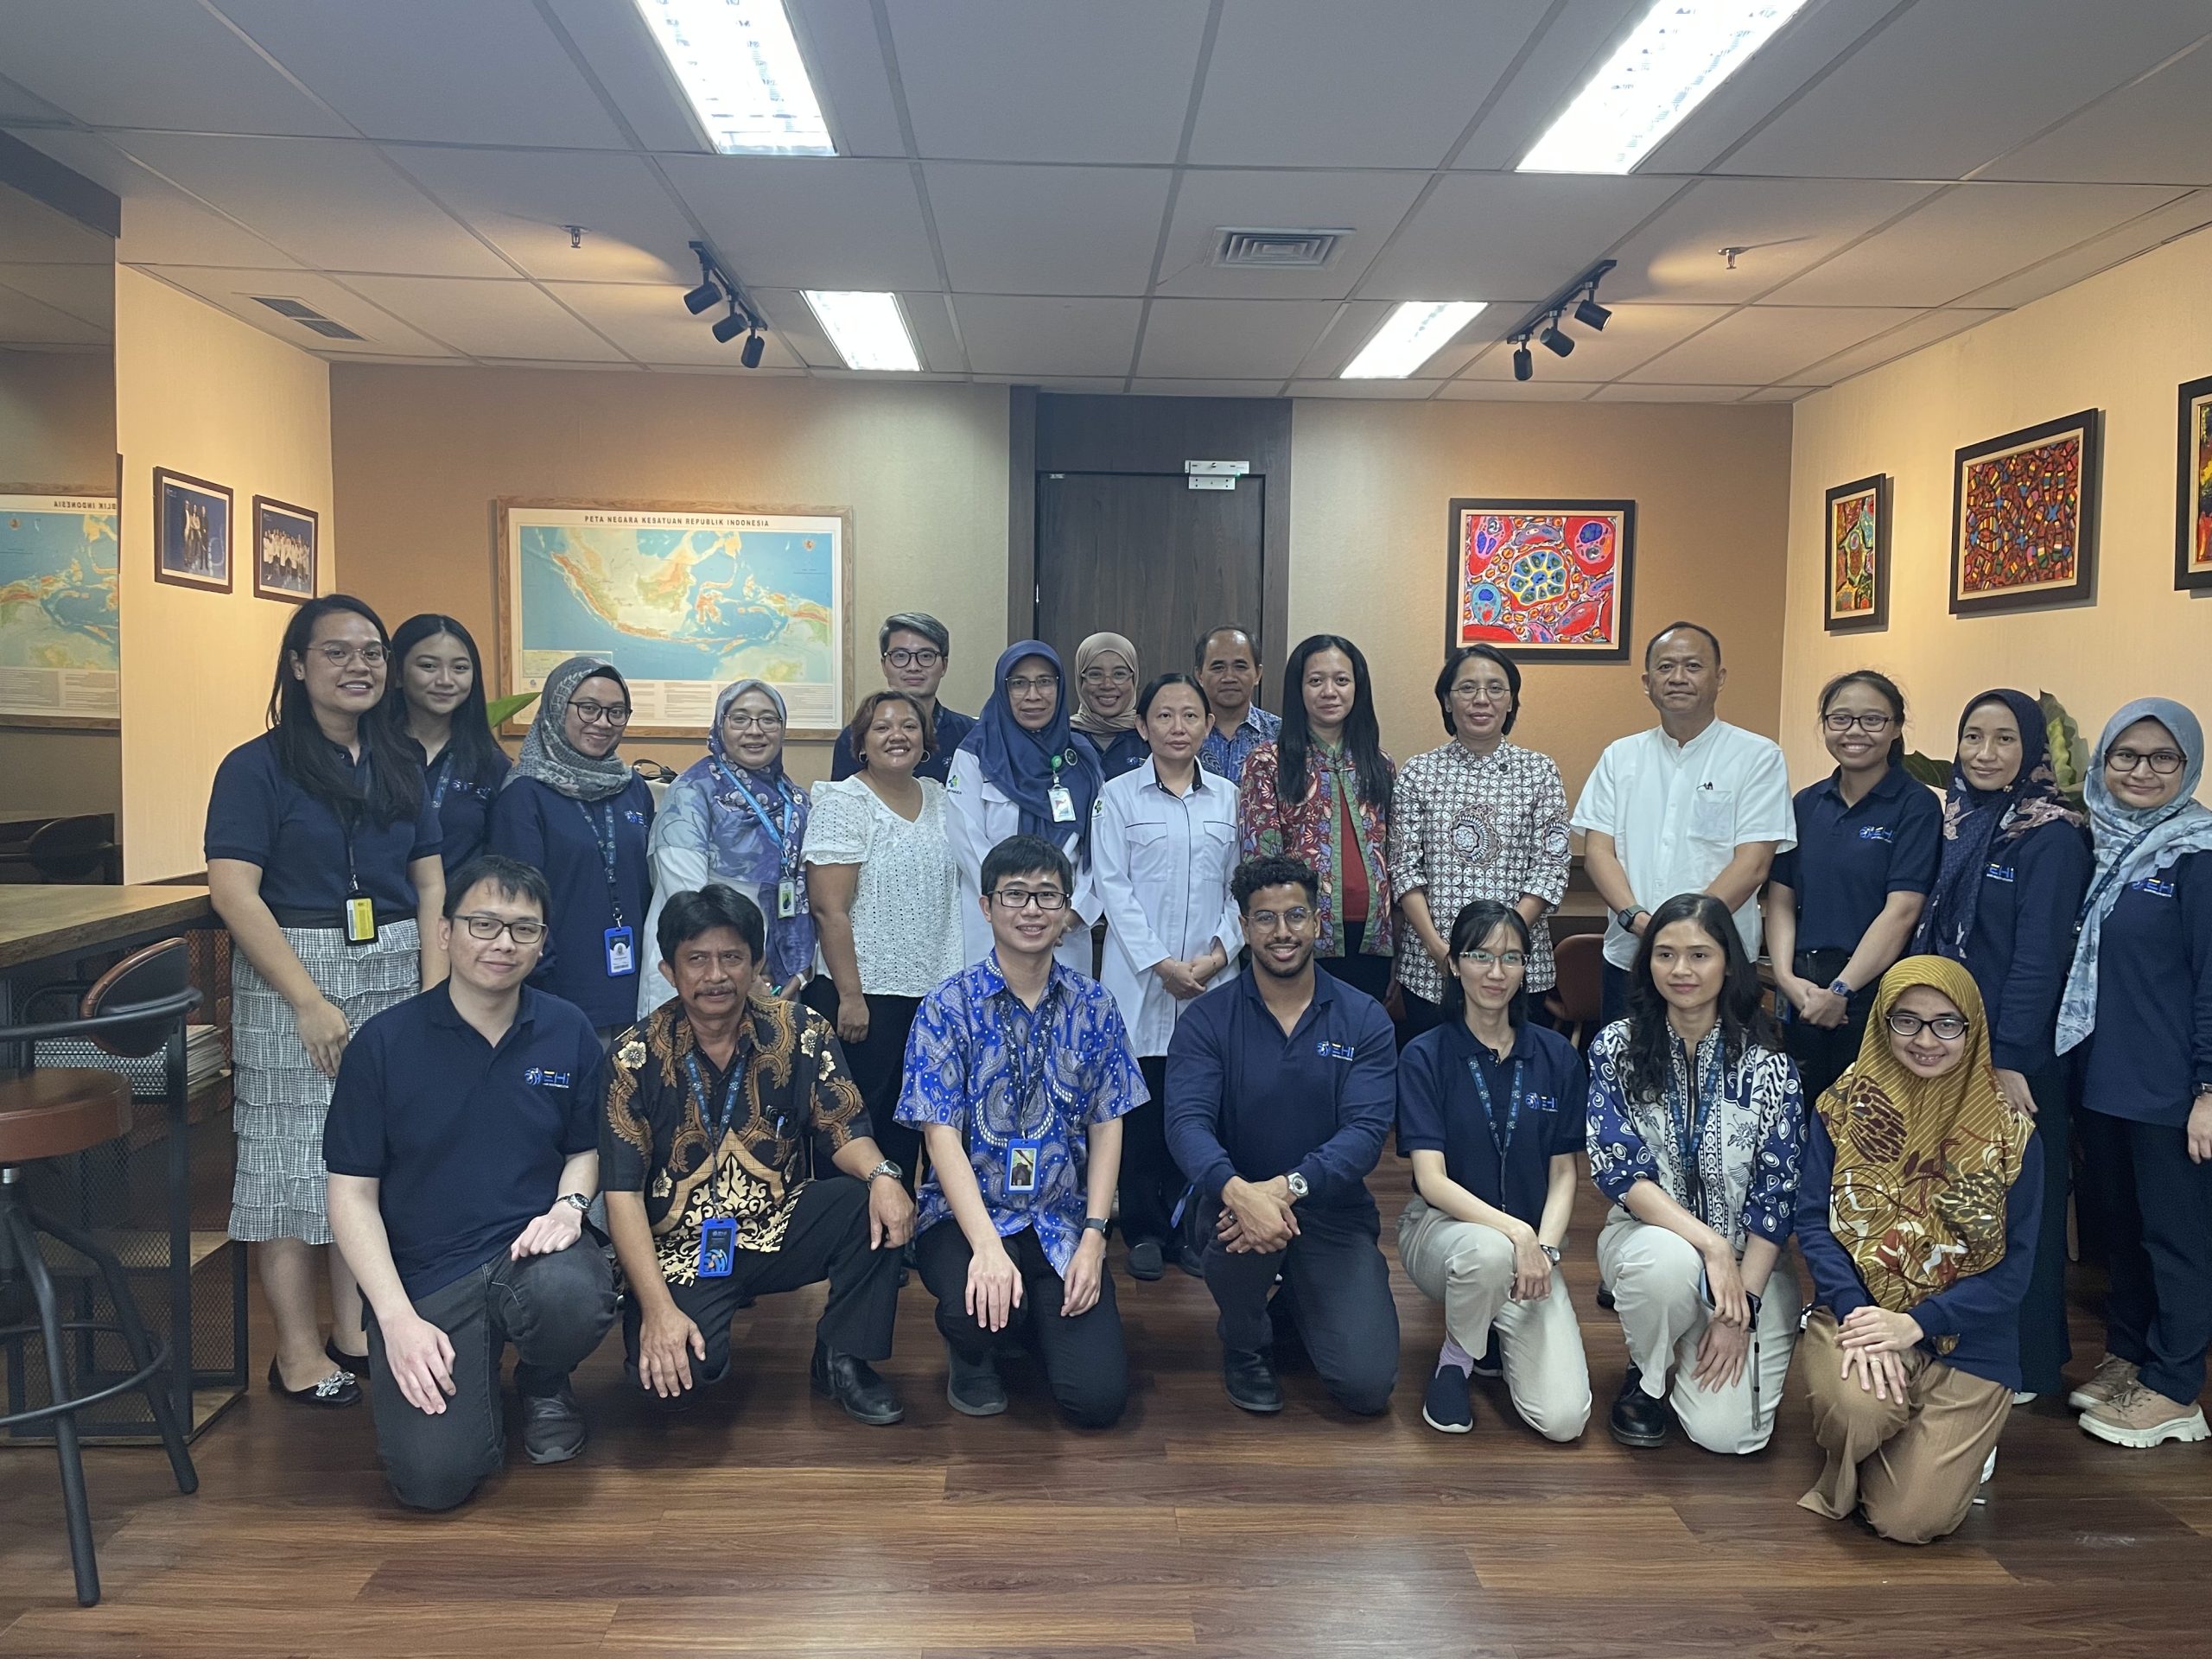 EHI invited the Director General of Public Health: Improving Public Health Perception and Research Distribution in Indonesia